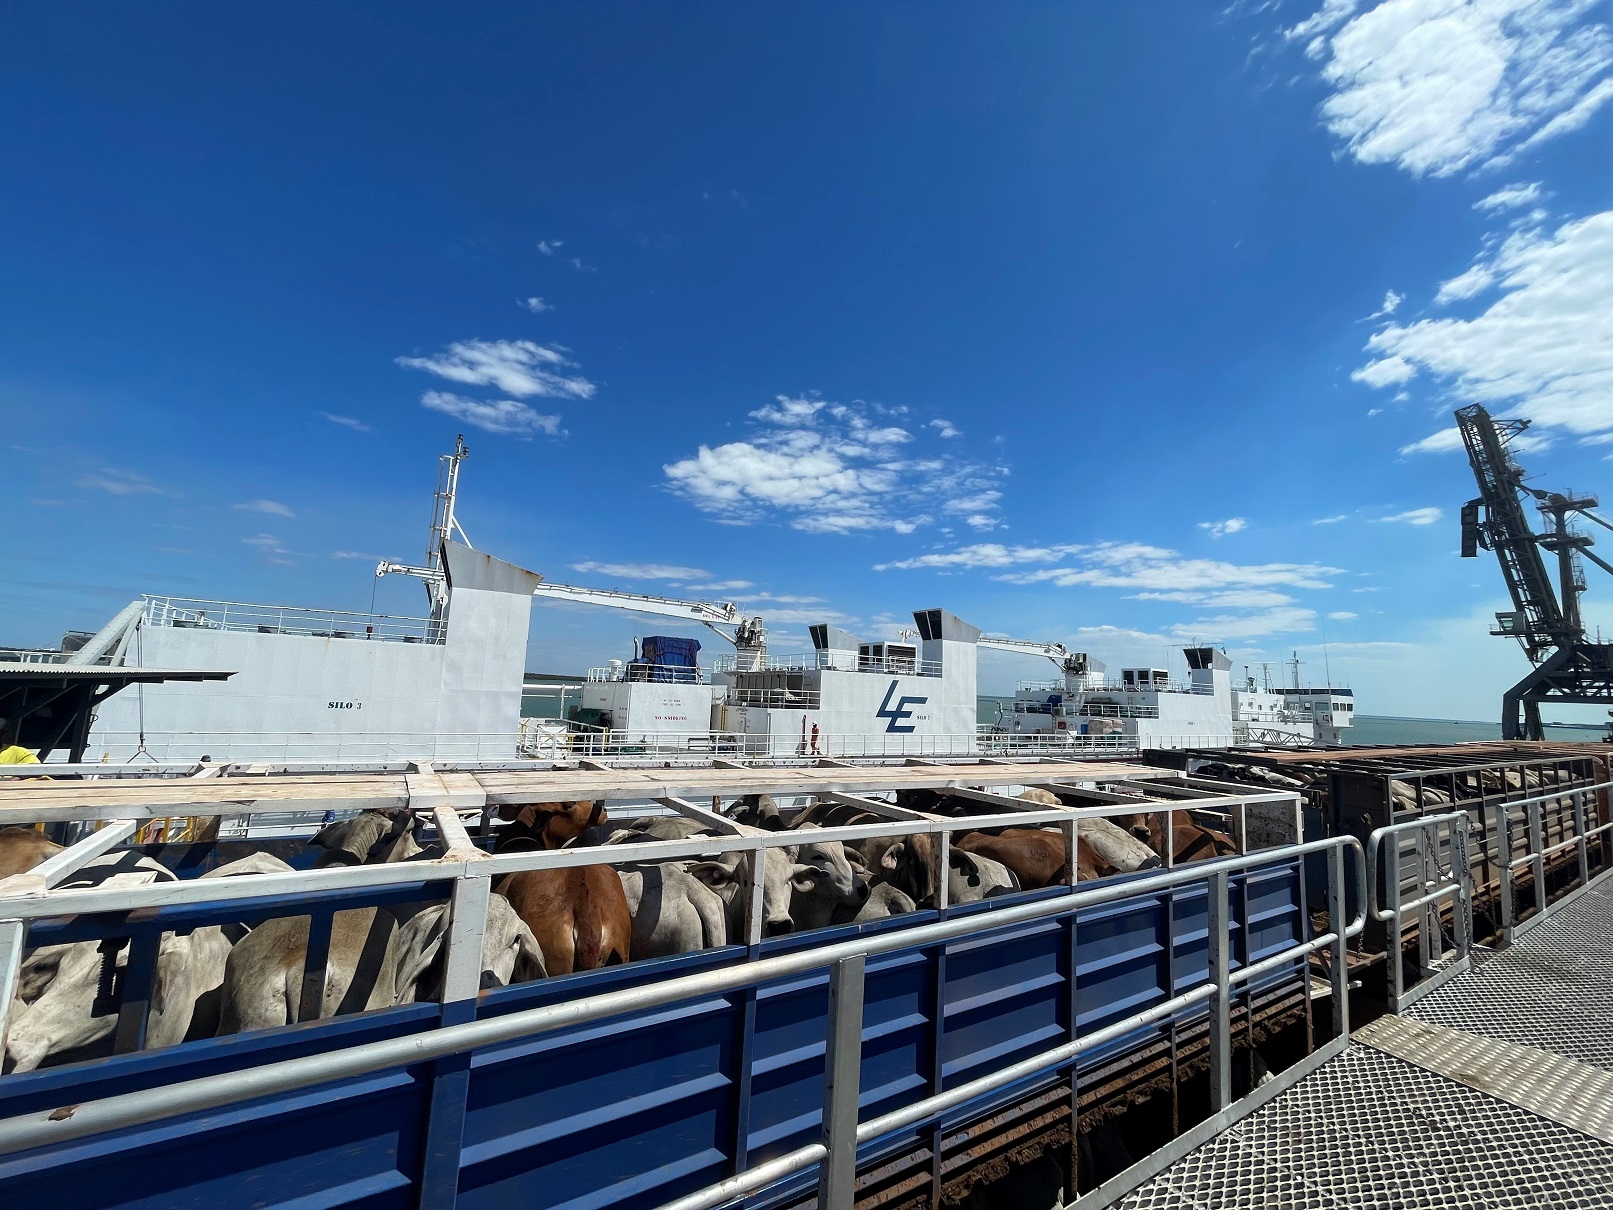 A truck of cattle is parked next to a large boat, ready to loaded for export 